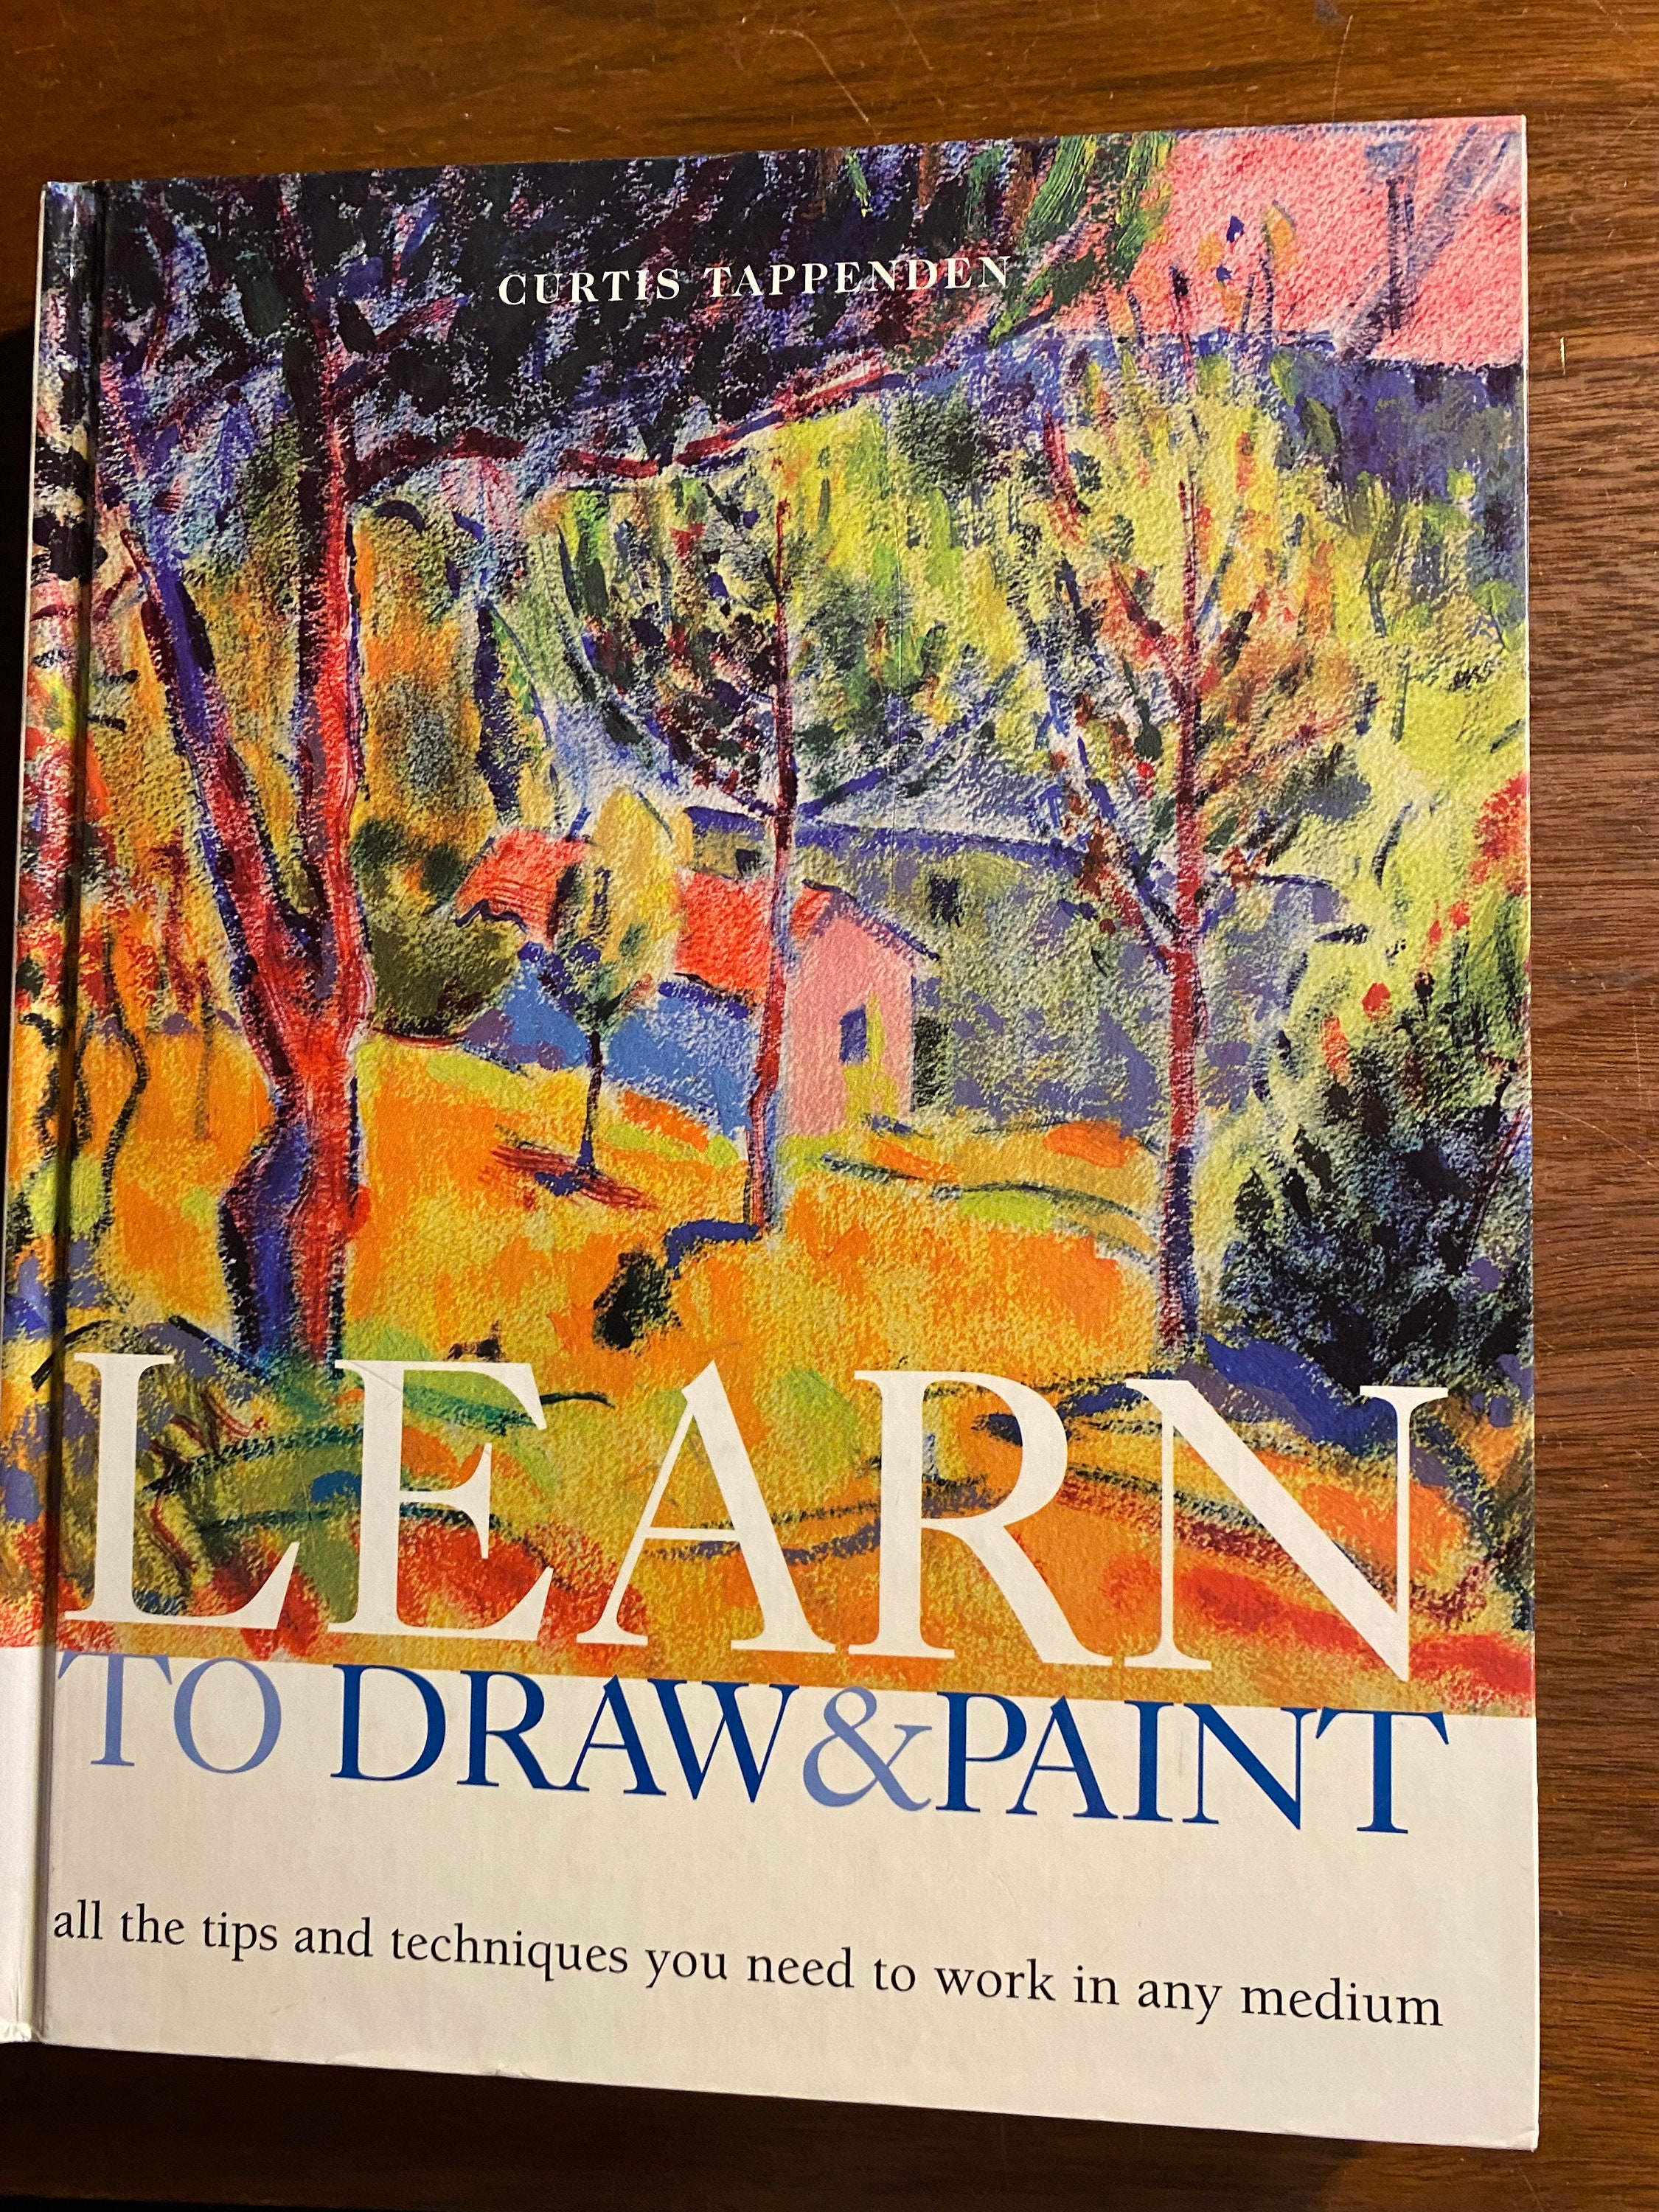 I want to learn how to draw : r/learntodraw